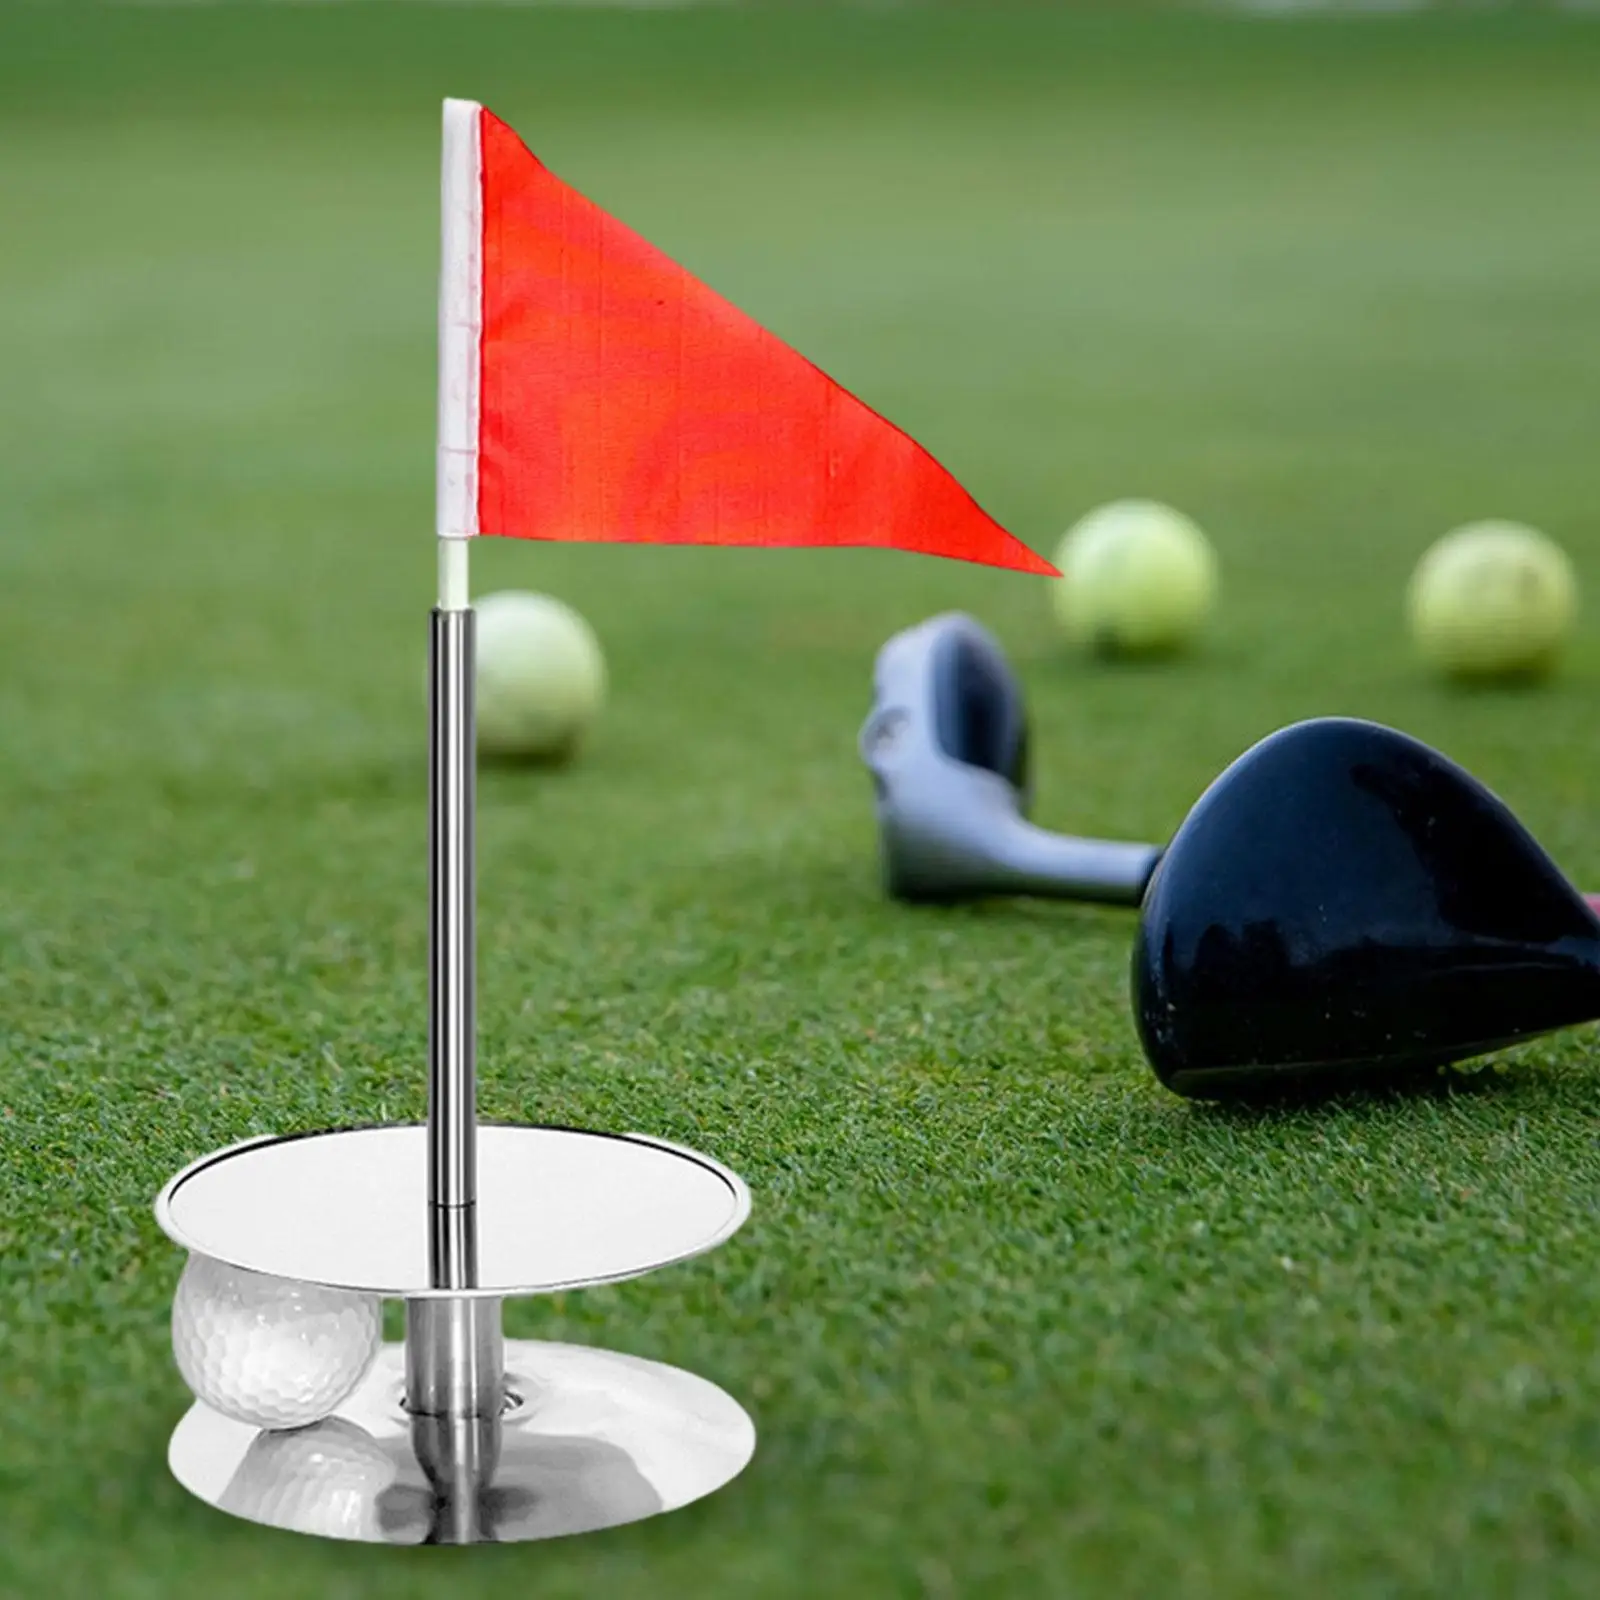 Golf Putting Cup Reusable Stainless Steel Putters Golf Flagpoles for Driving Range Kids Home Alignment Guide Backyard